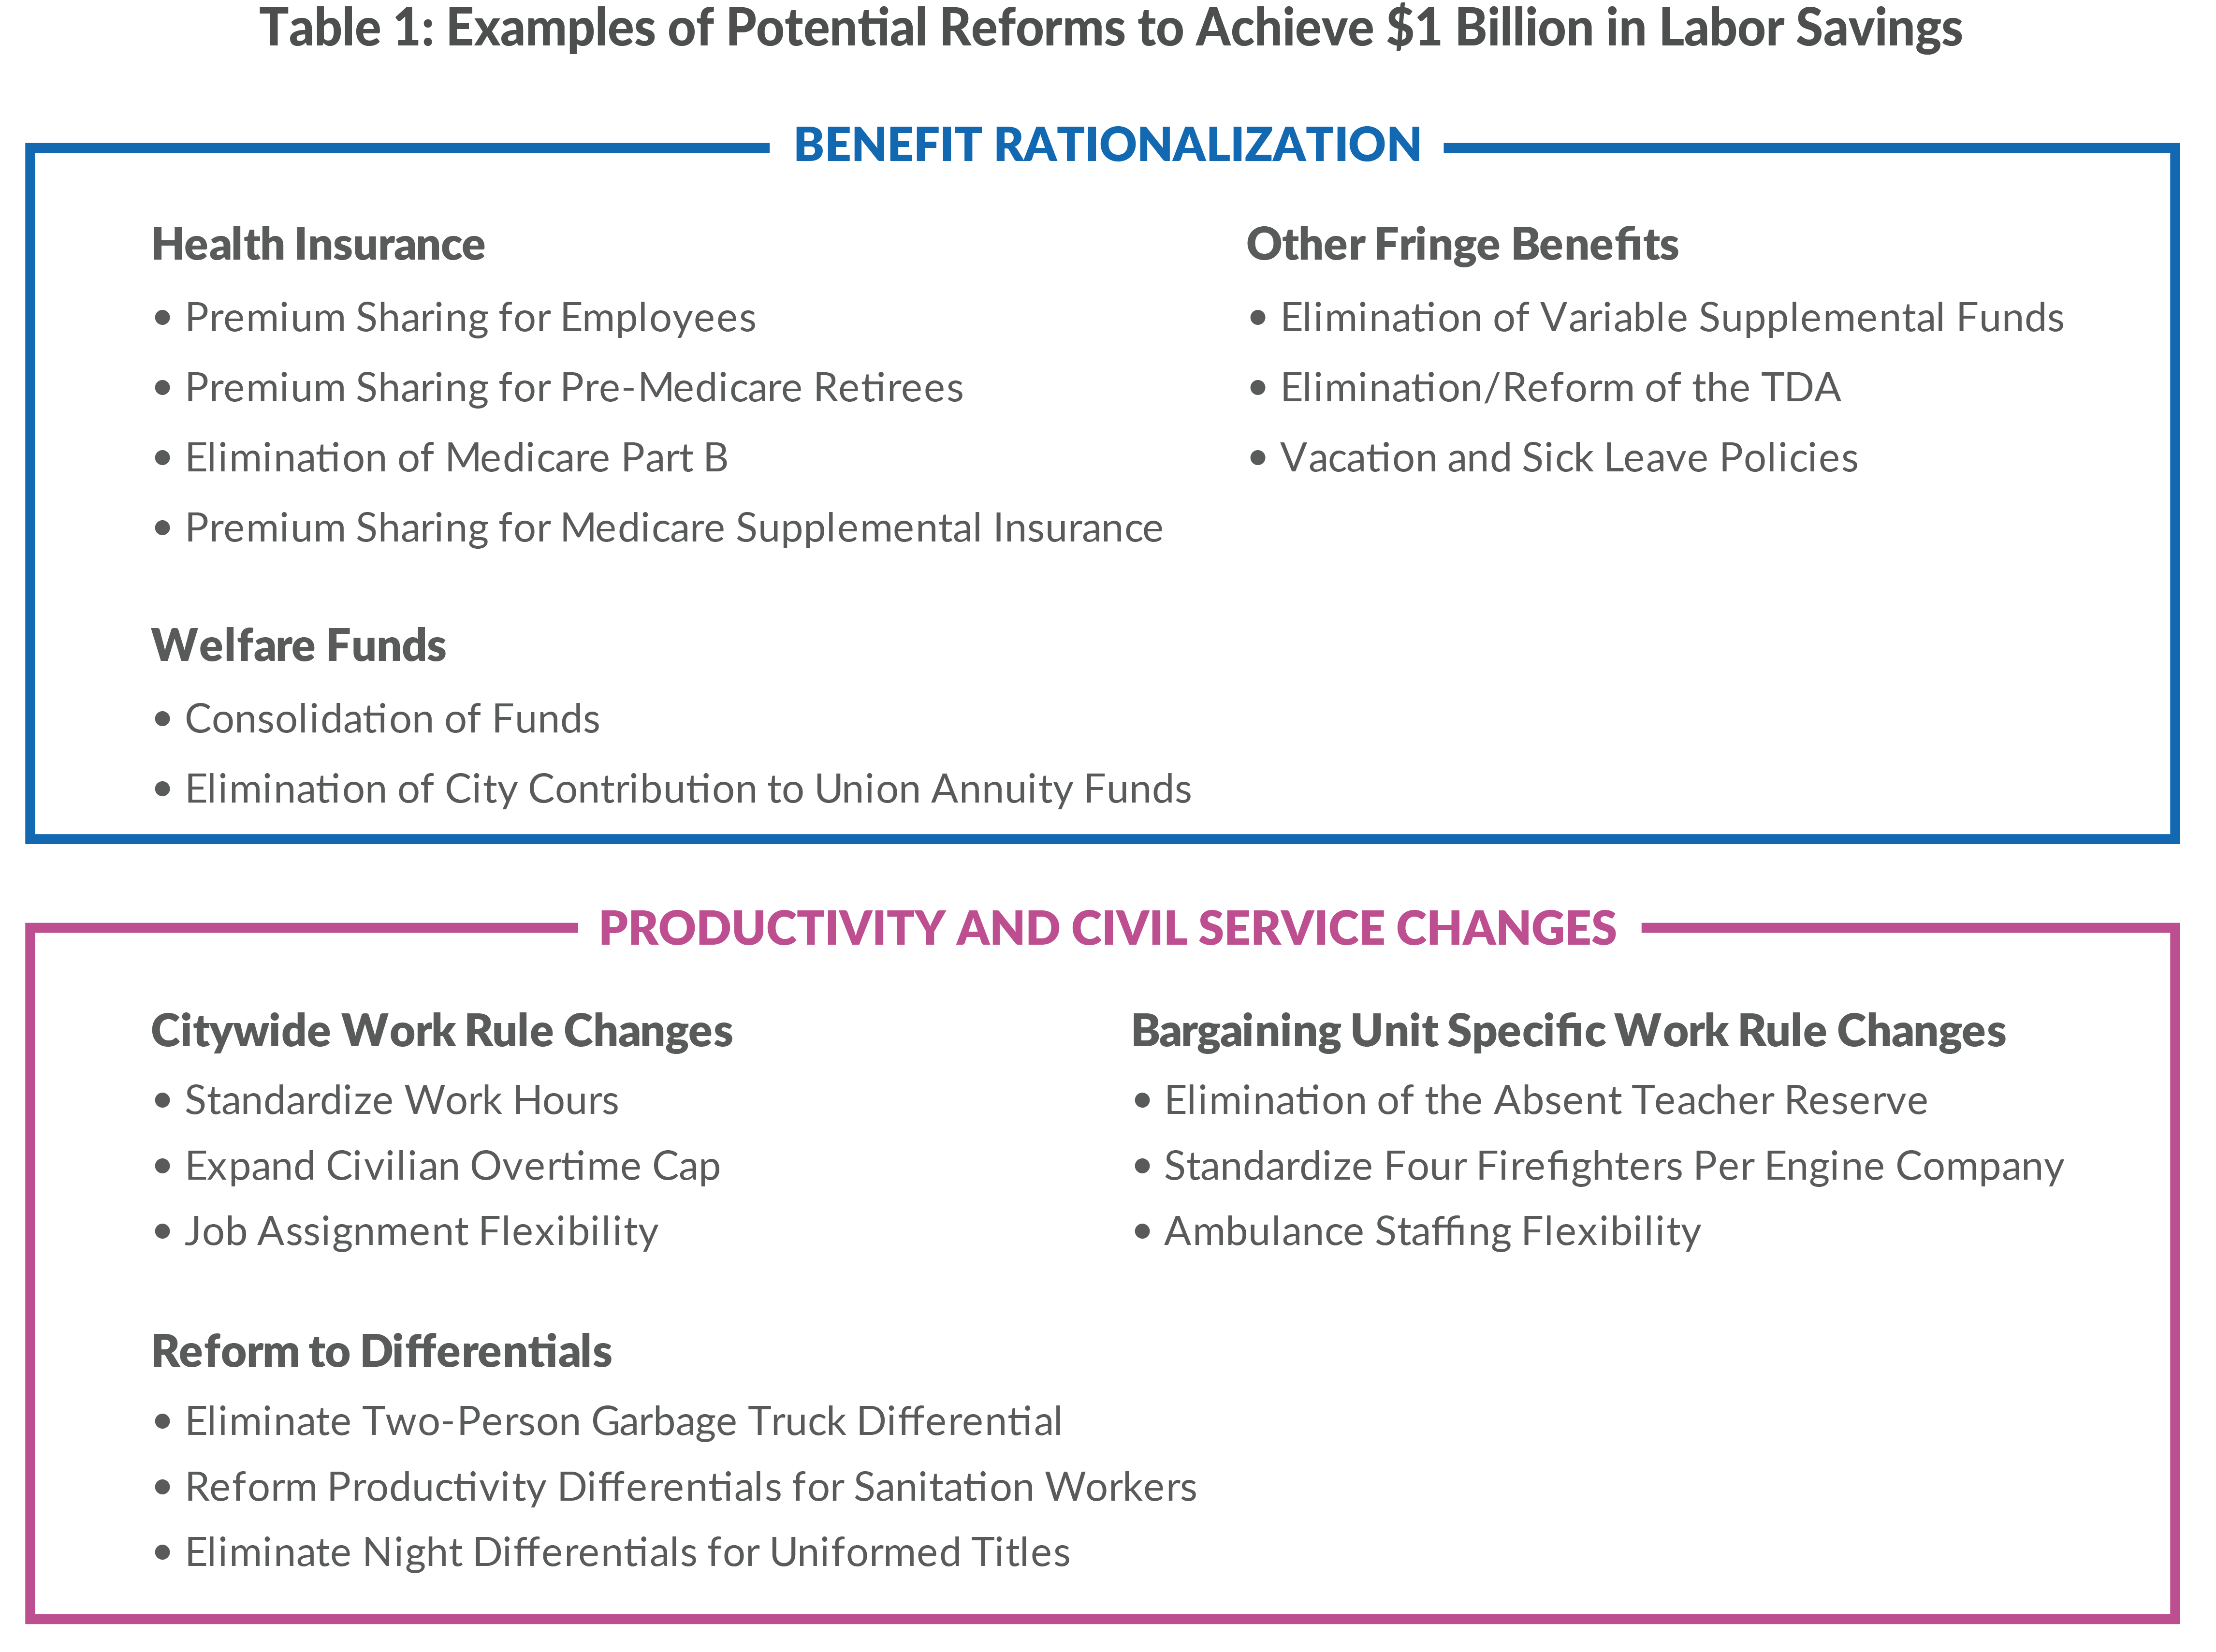 Examples of Potential Reforms to Achieve $1 Billion in Labor Savings